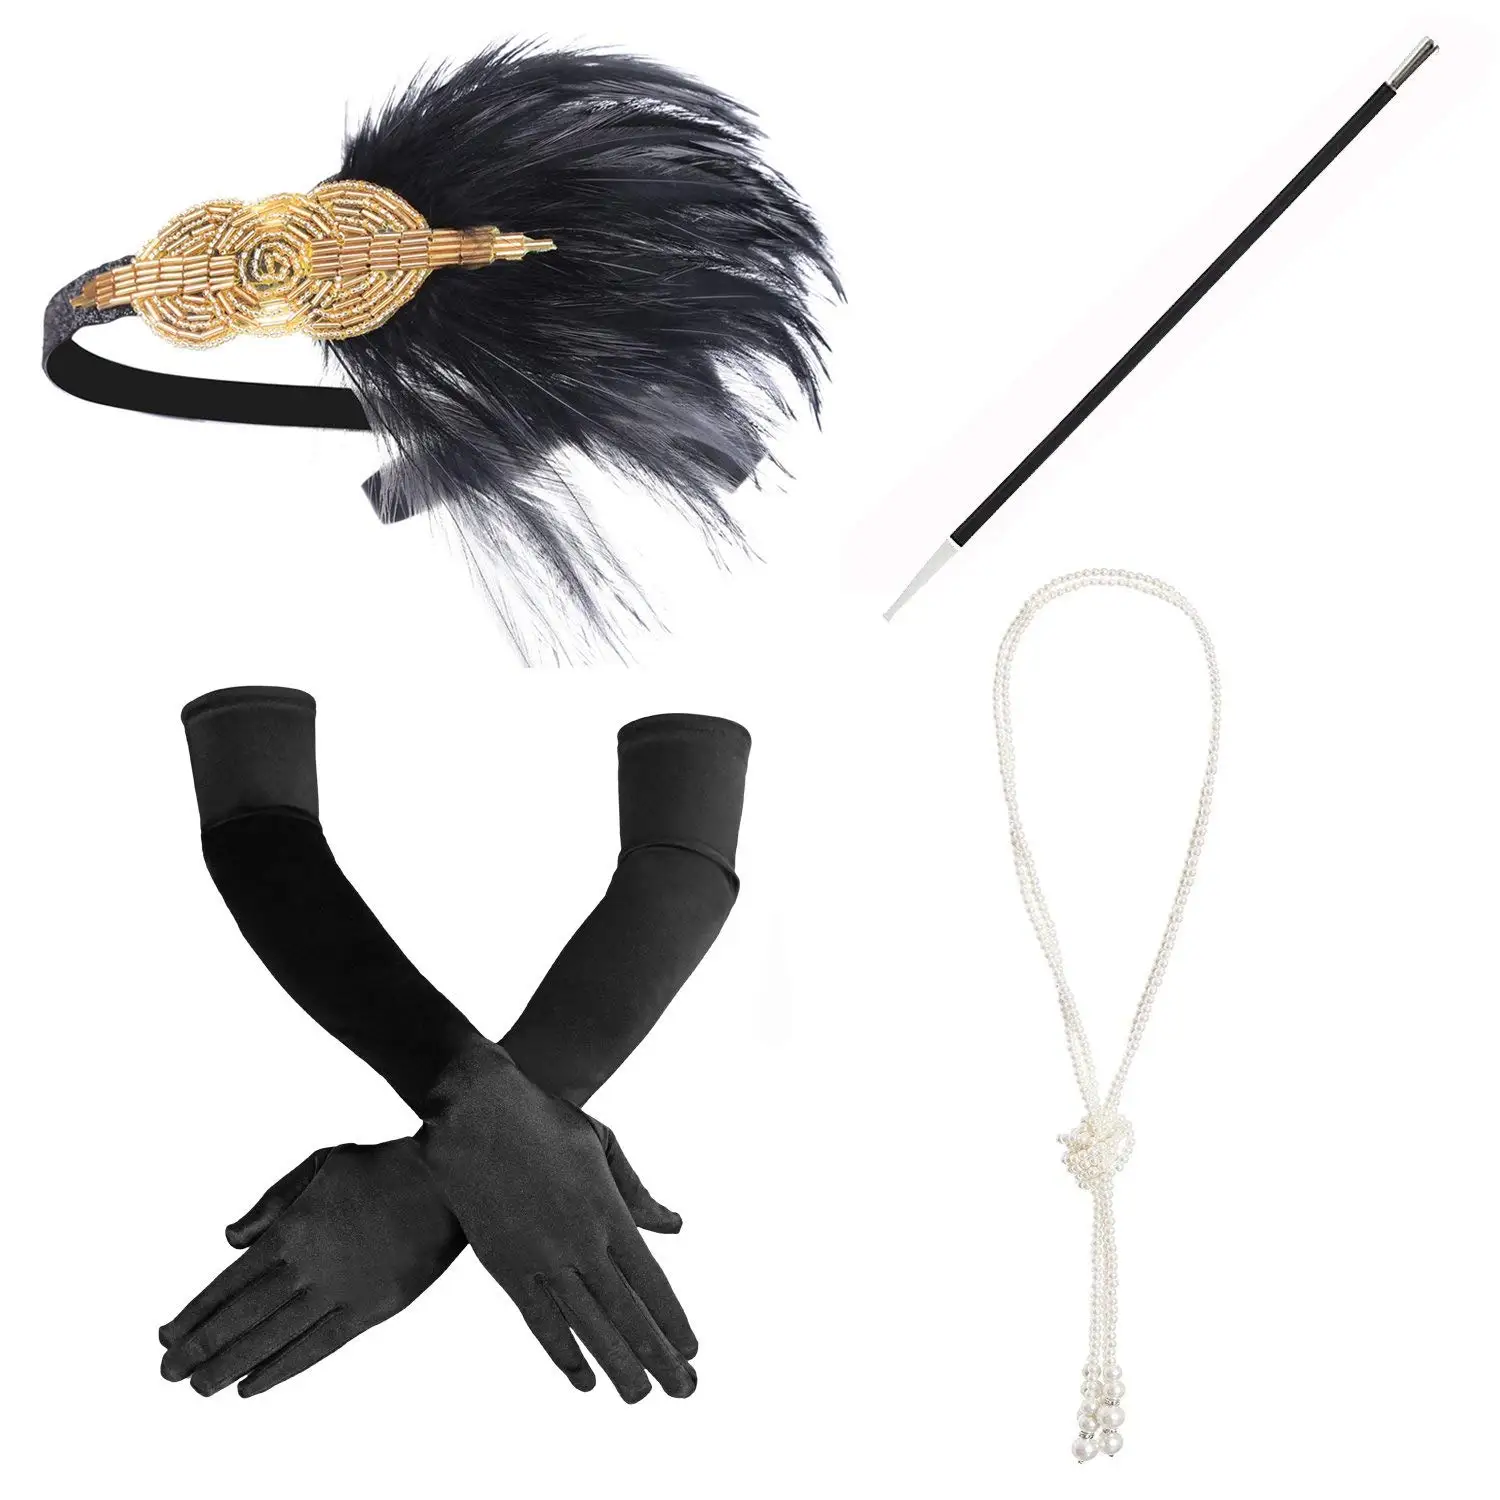 

4 Pcs/Set 1920s Great Gatsby Party Costume Accessories Set 20s Flapper Feather Headband Pearl Necklace Gloves Cigarette Holder